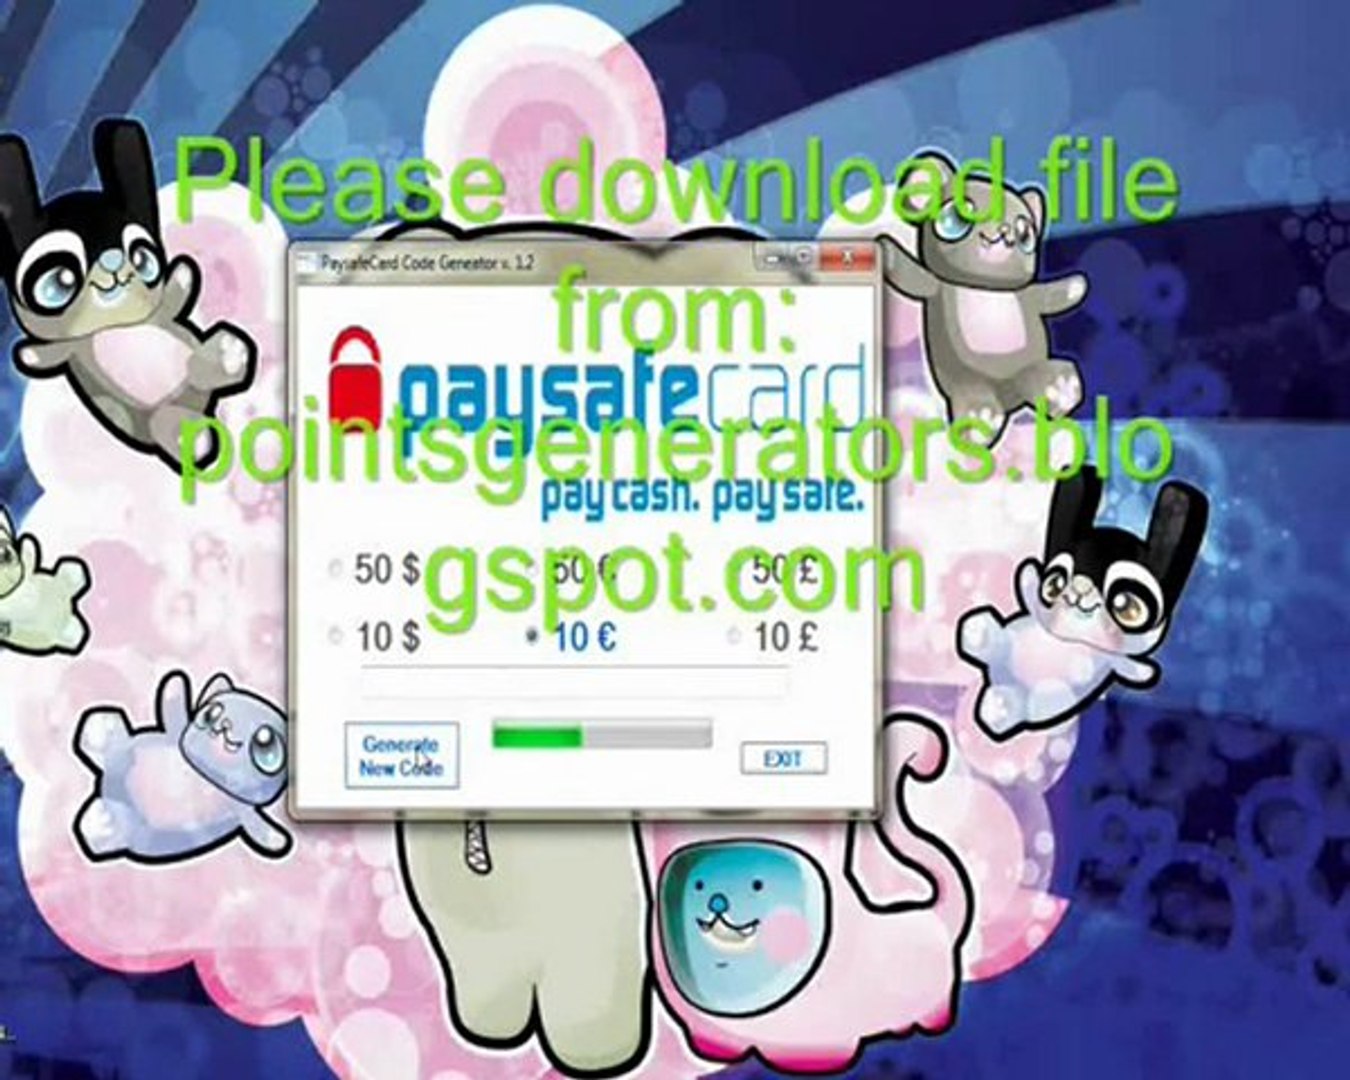 PaysafeCard Code Geneator 2012 v. 1.2 - Newest Version - video Dailymotion